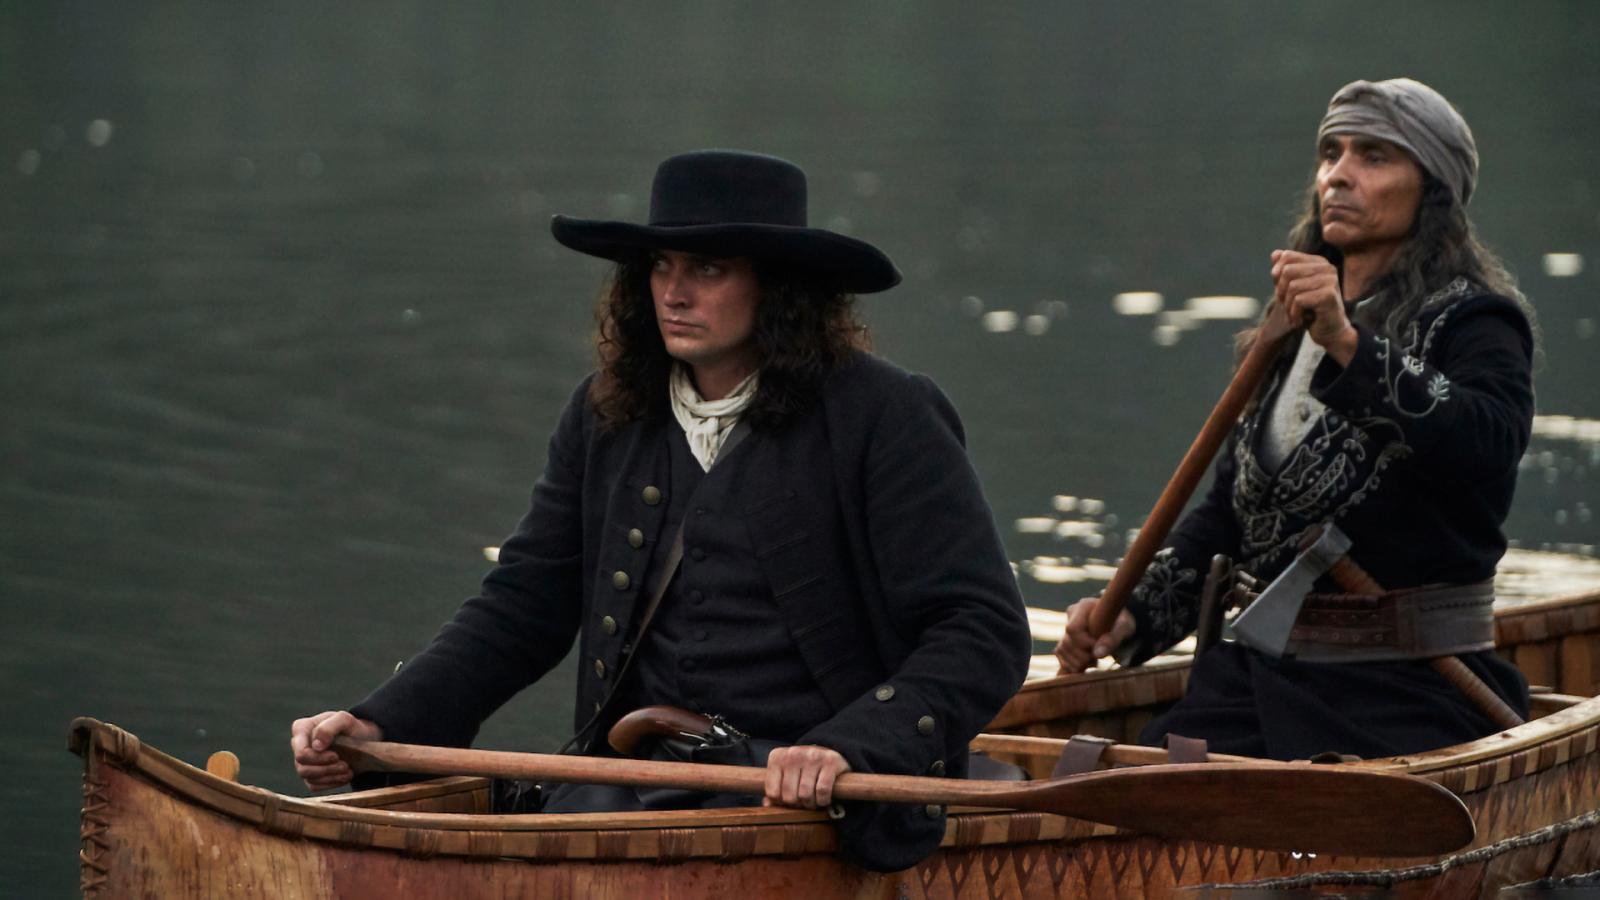 5 TV Shows About America's Colonial Era That Got Their History Right - image 1